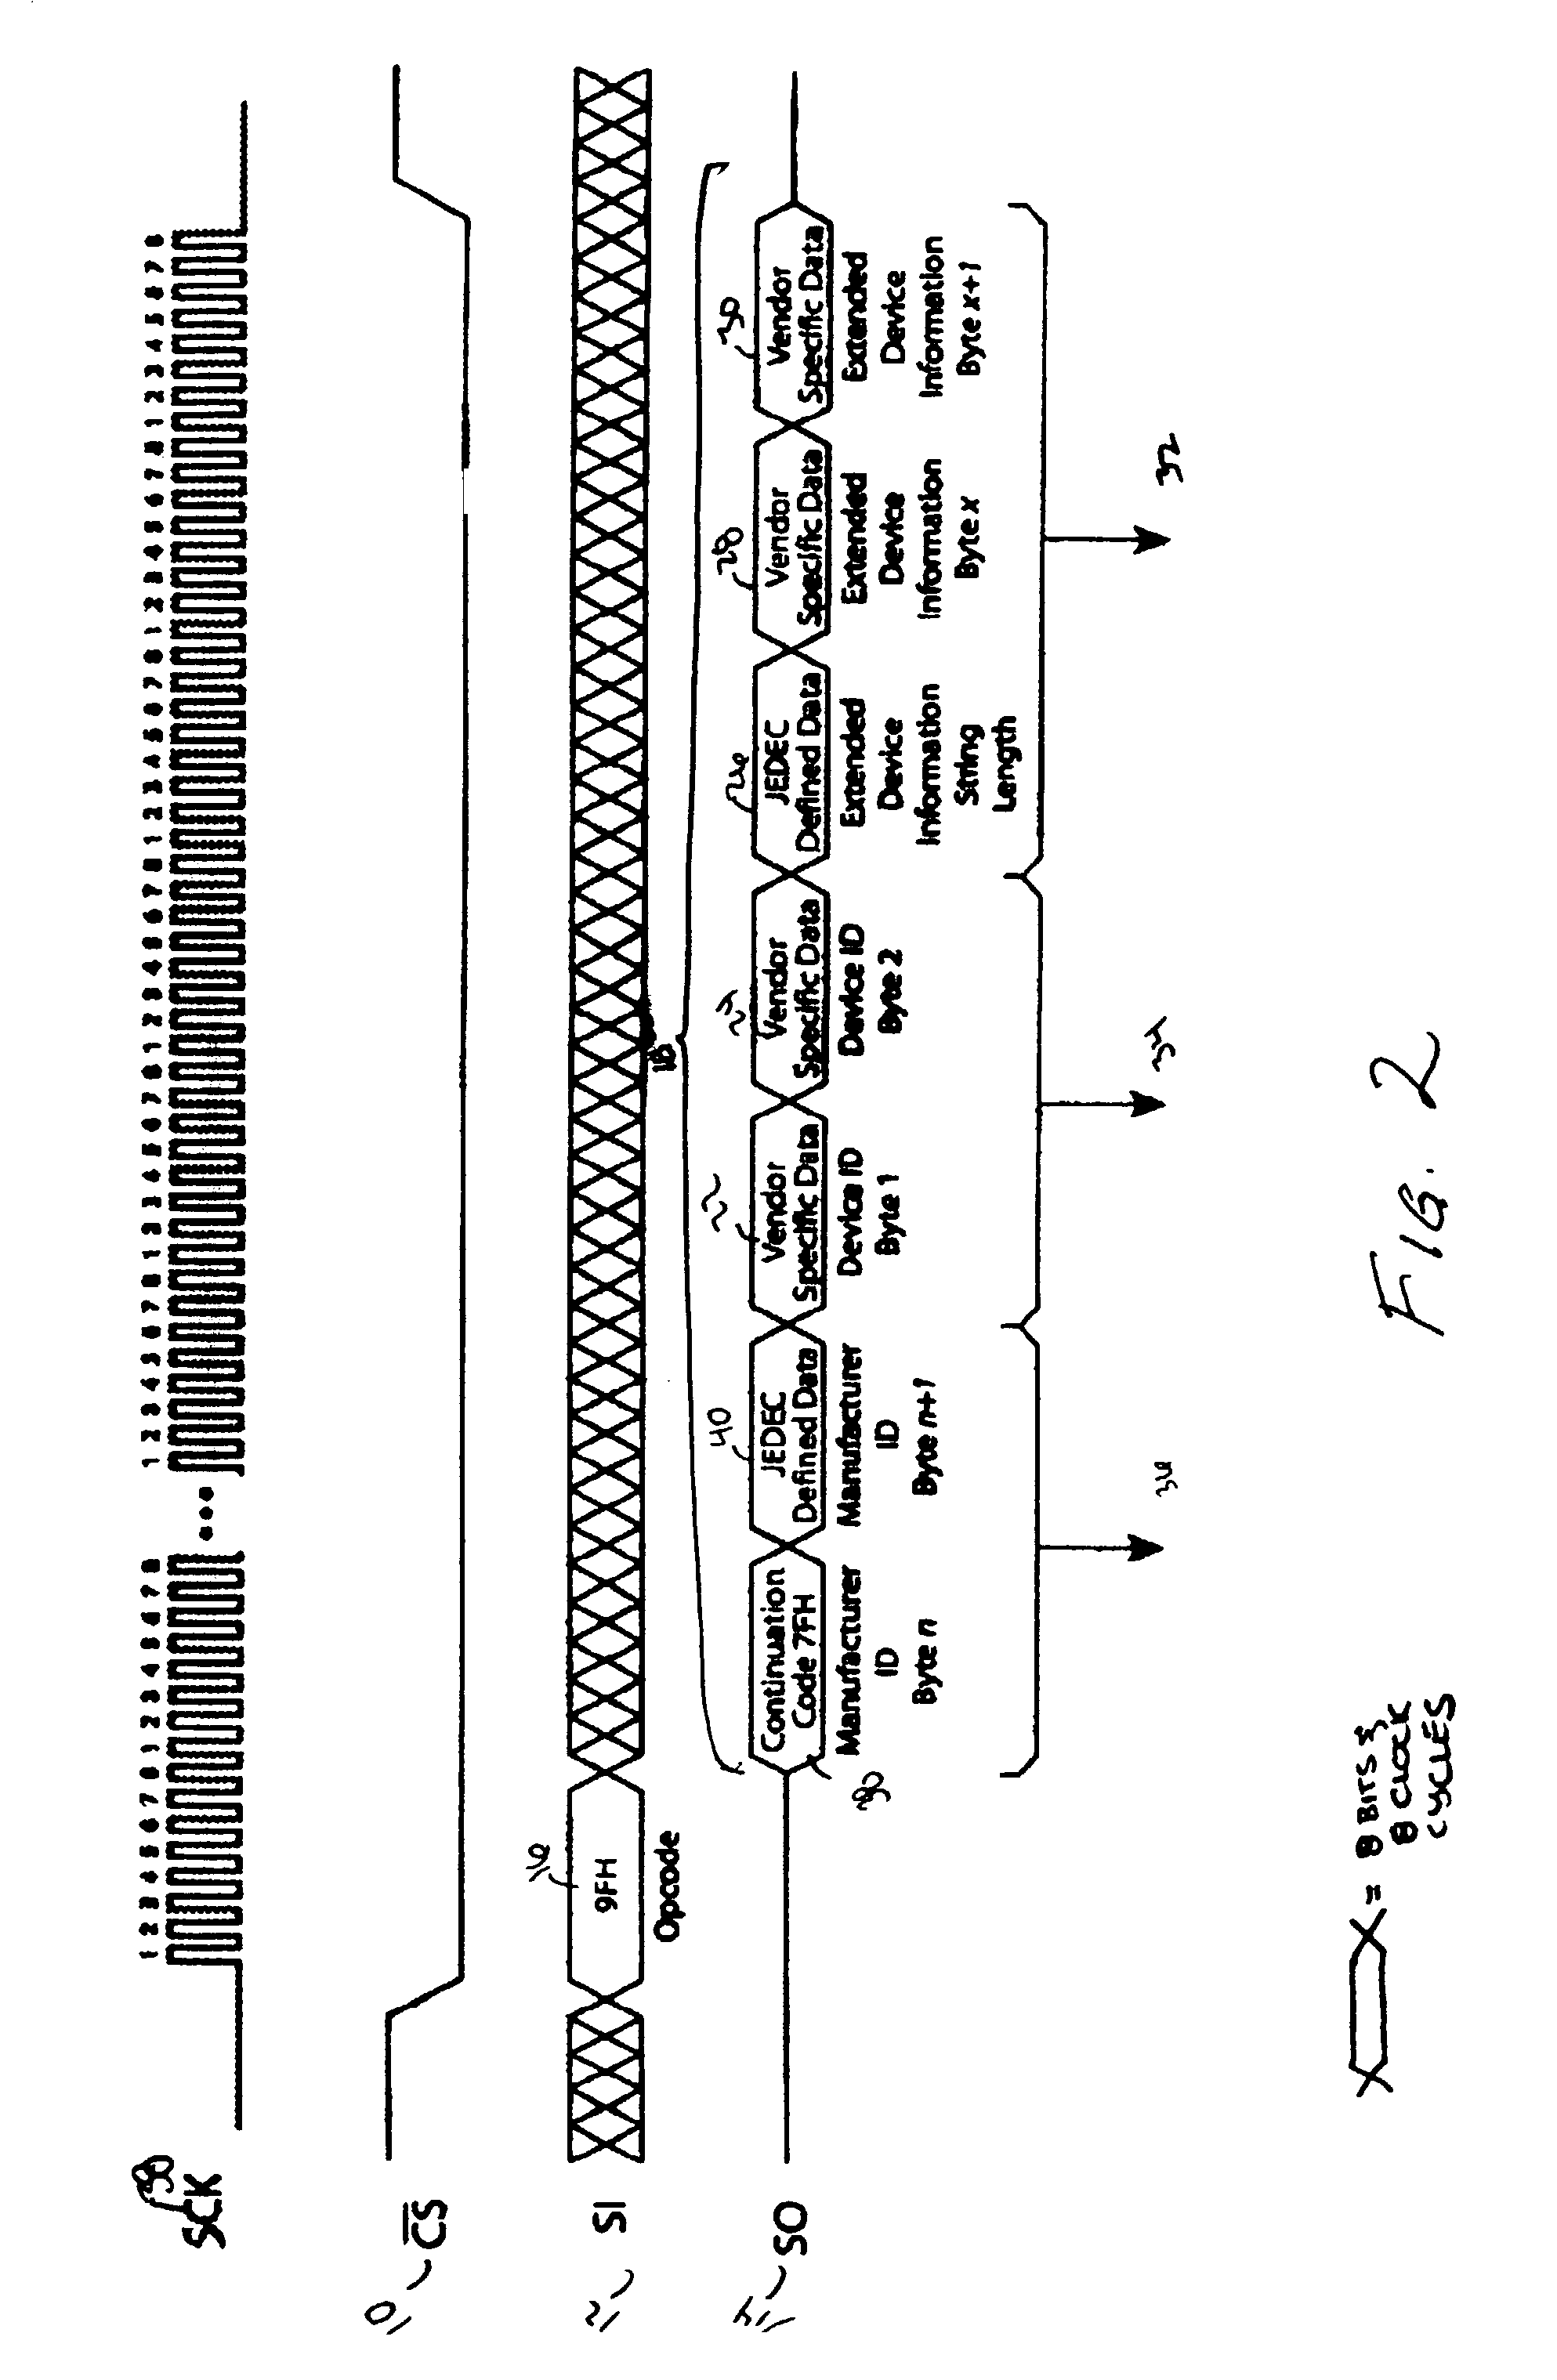 Method for identification of SPI compatible serial memory devices